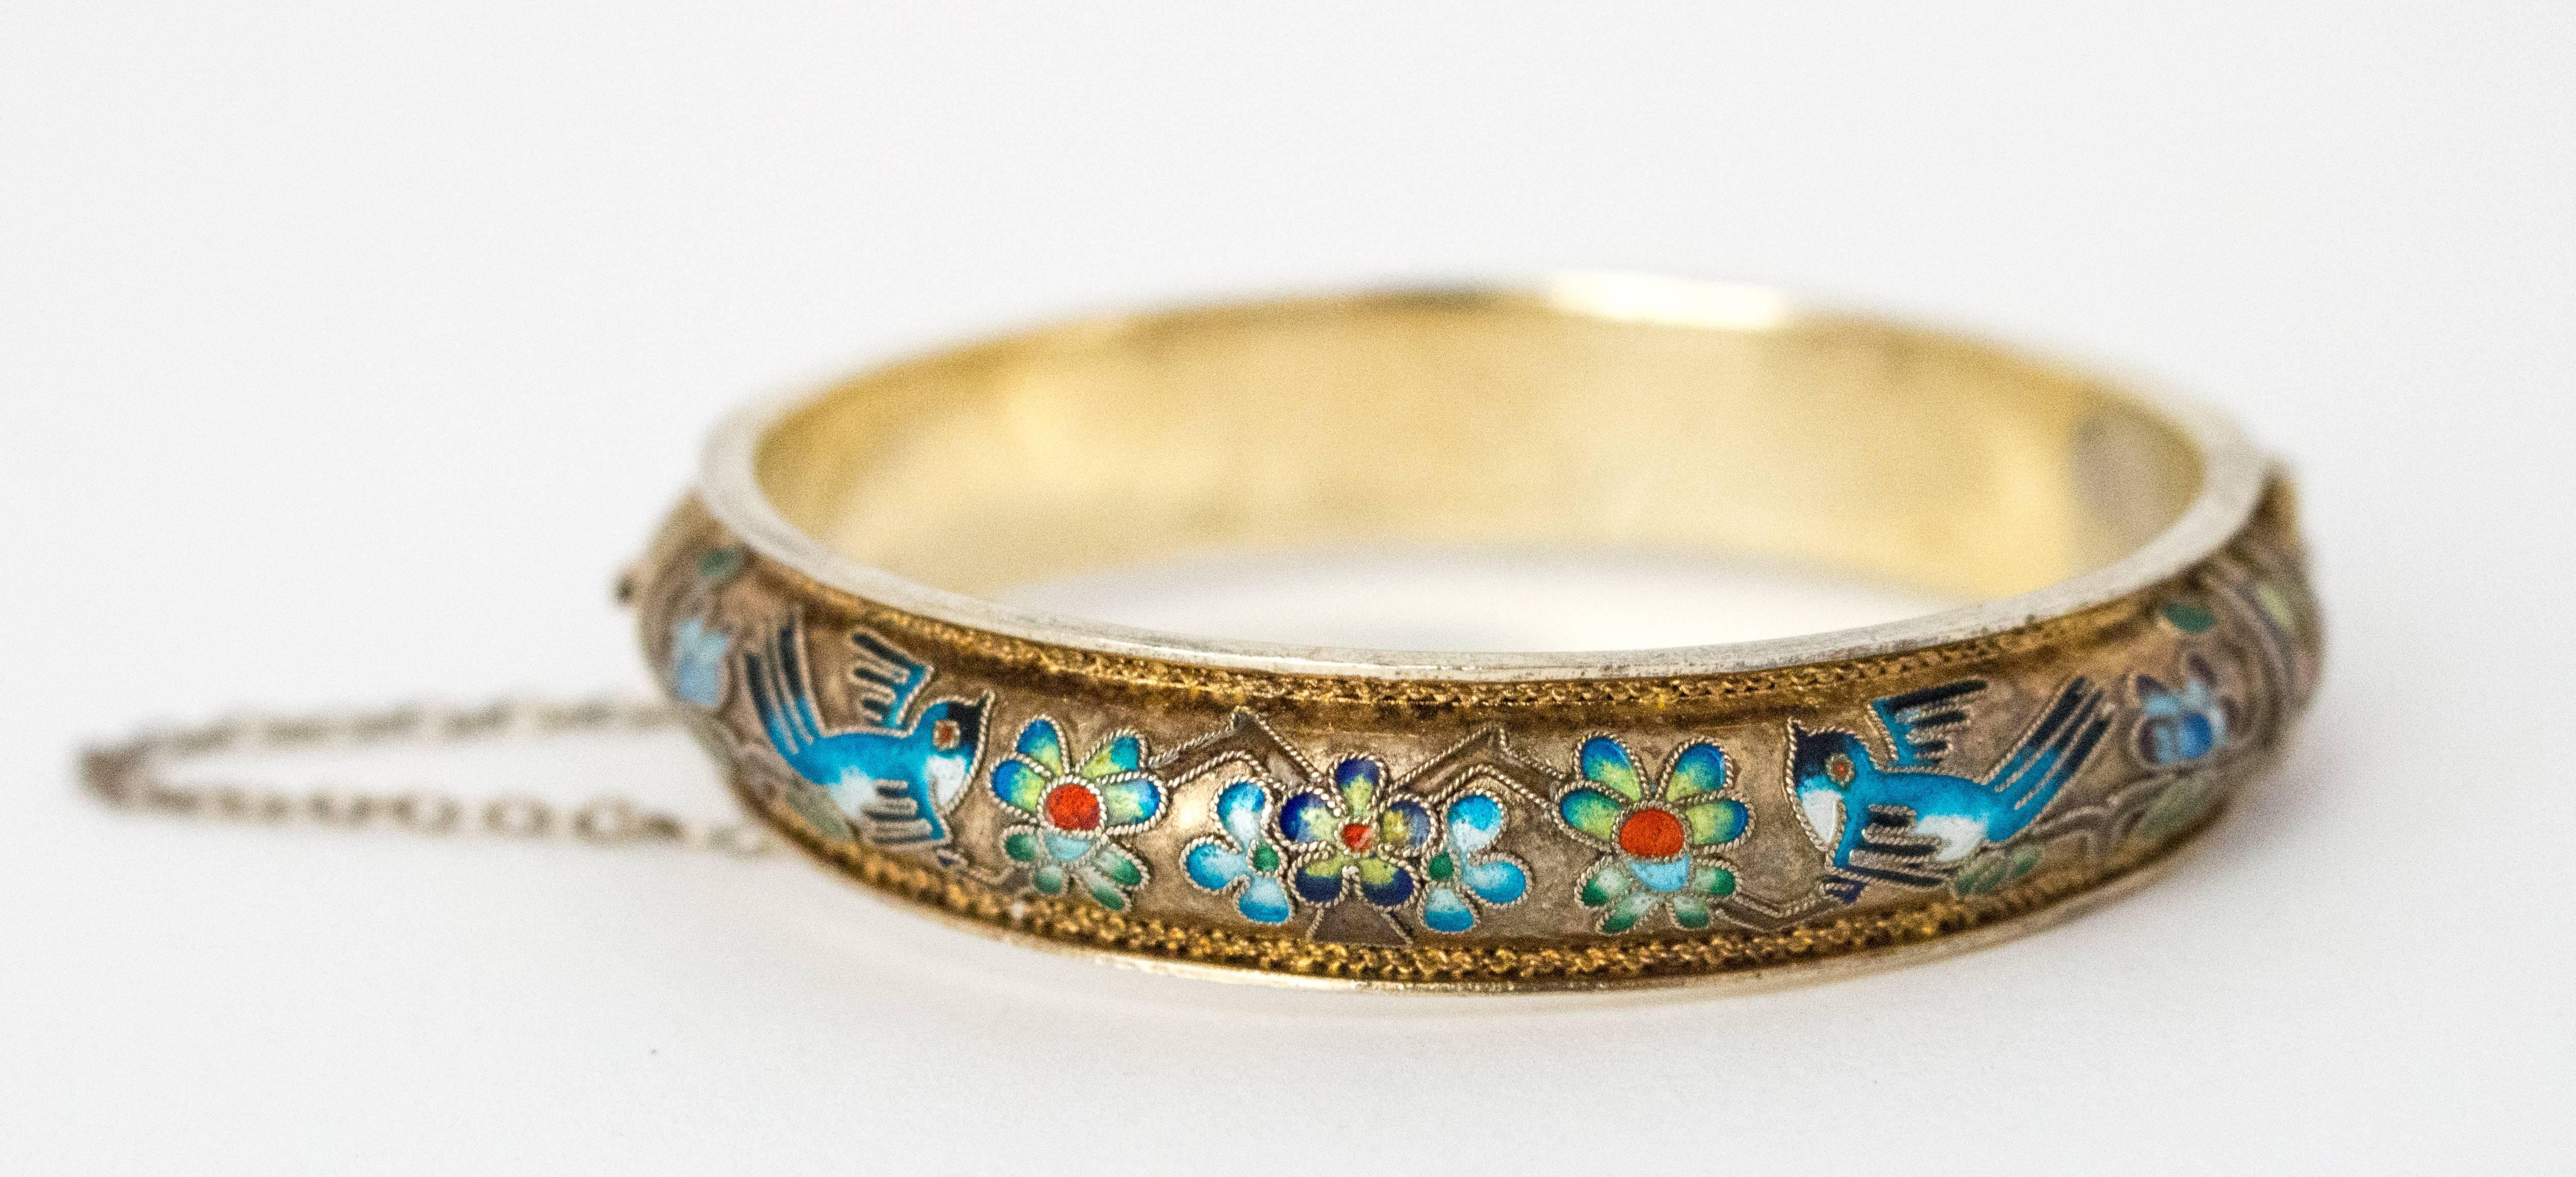 50s Champleve Silver Bangle with a Gold Wash, Enamel Blue Birds & Flowers. 